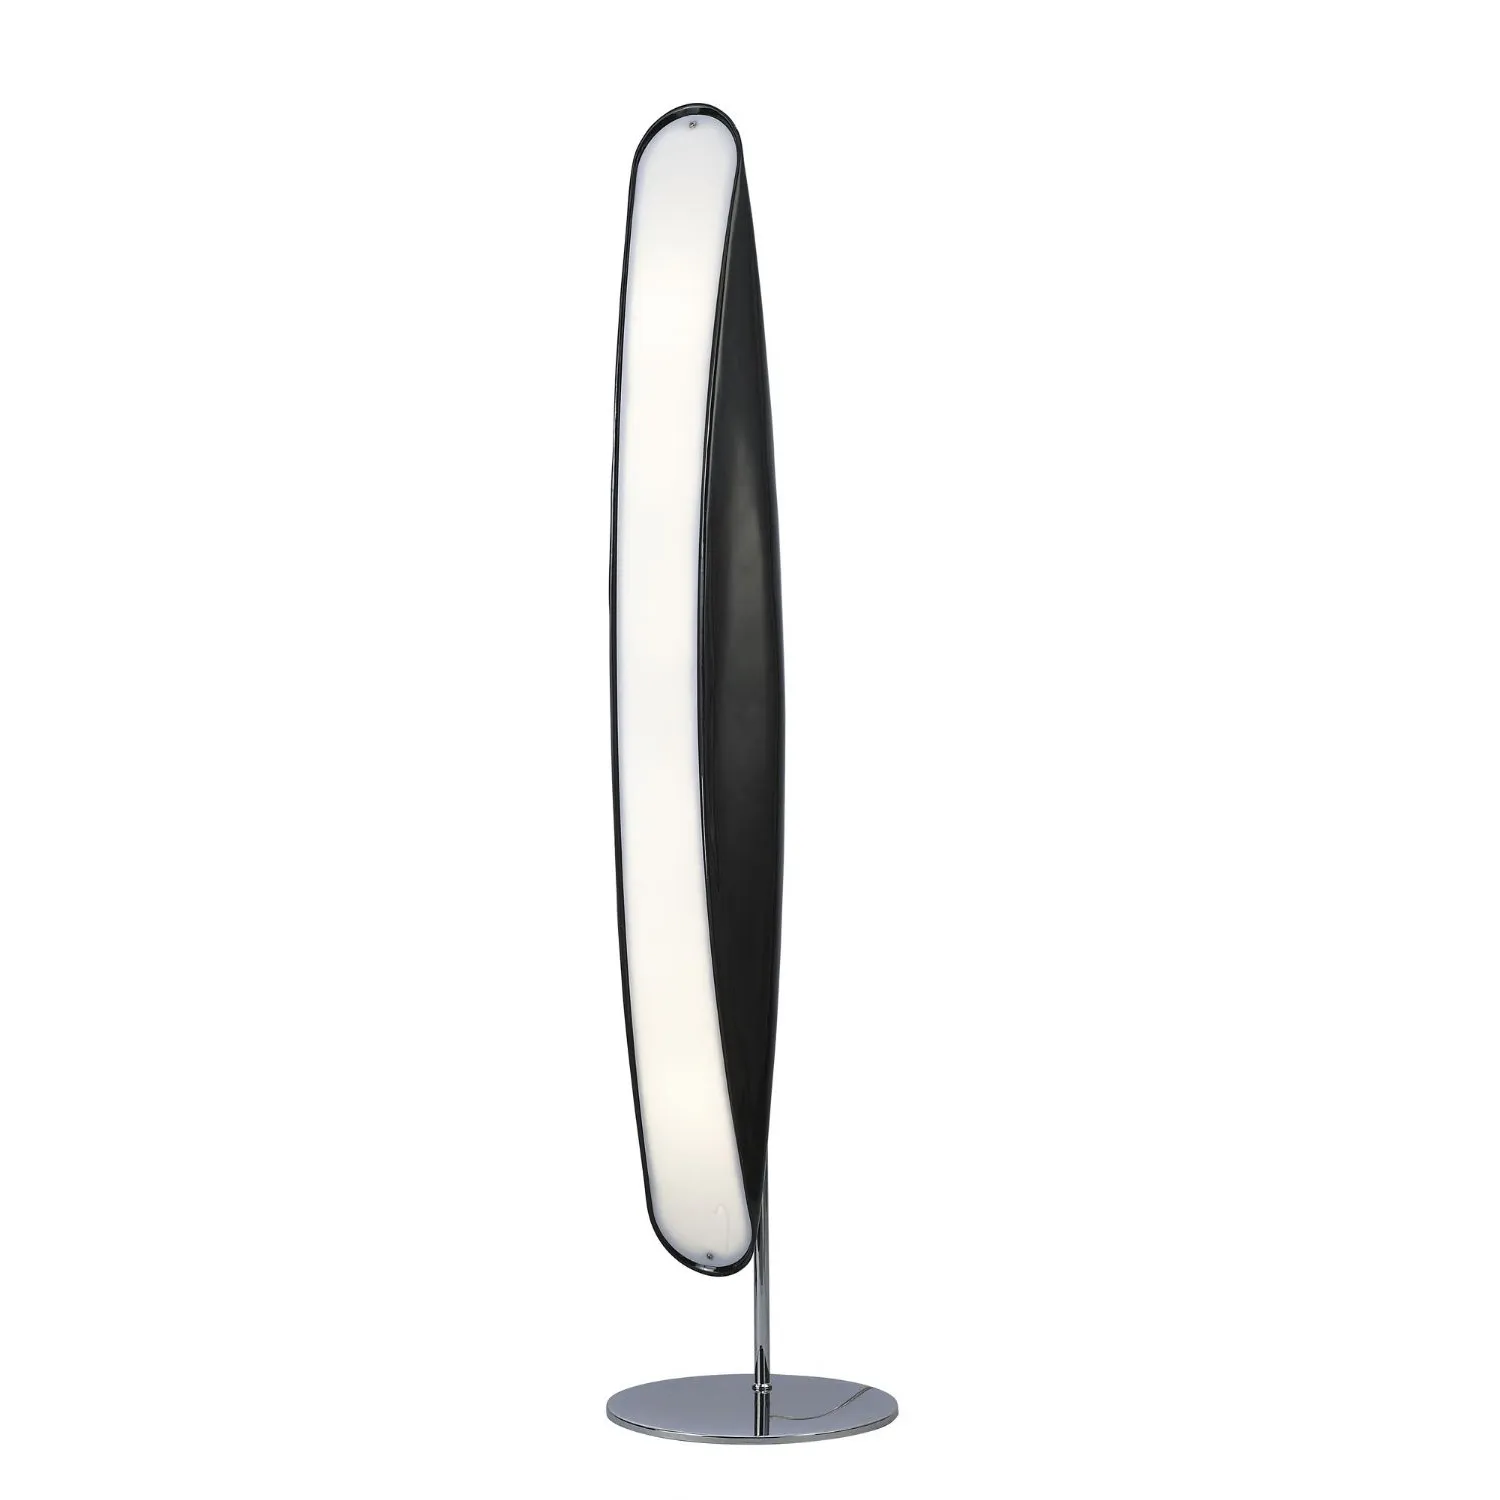 Pasion Floor Lamp 6 Light E27, Gloss Black White Acrylic Polished Chrome, CFL Lamps INCLUDED (COLLECTION ONLY)